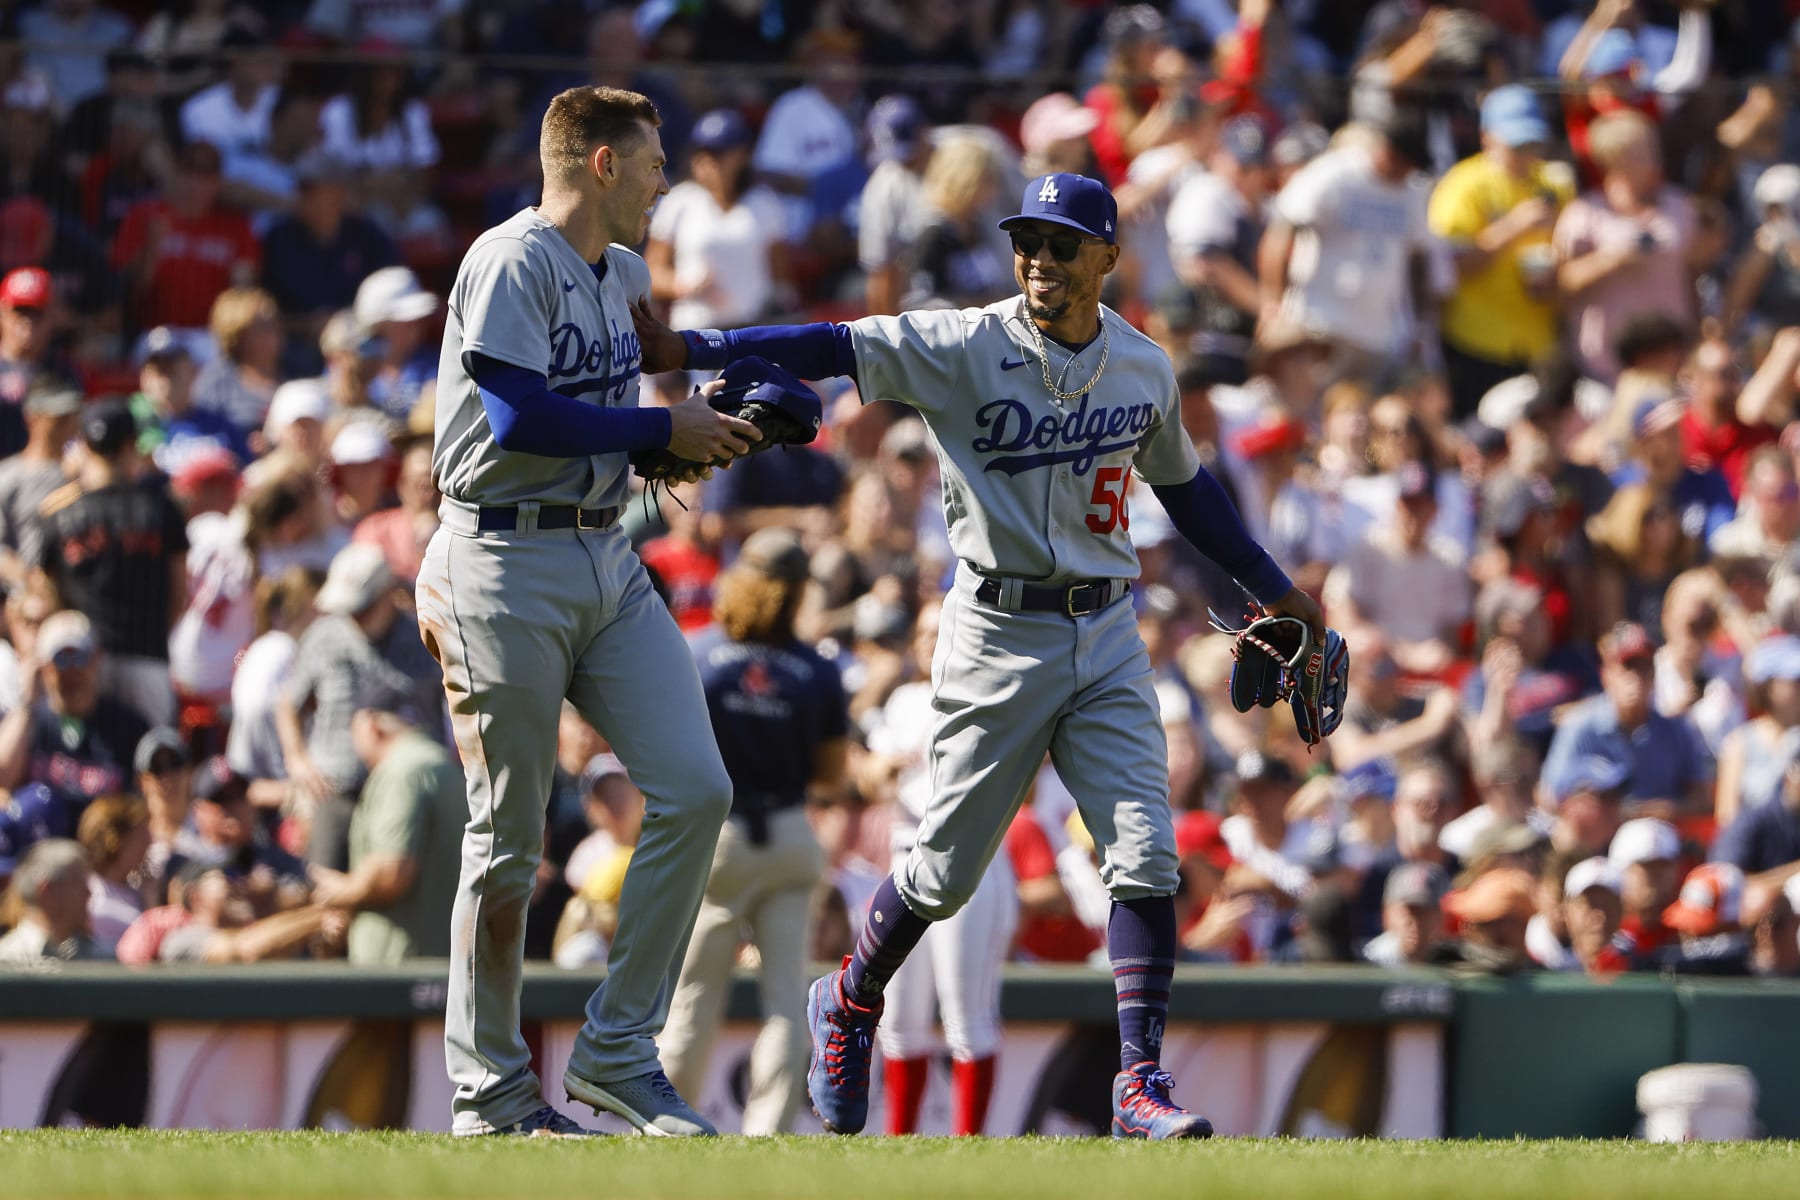 New York Yankees vs. Los Angeles Dodgers might be World Series preview